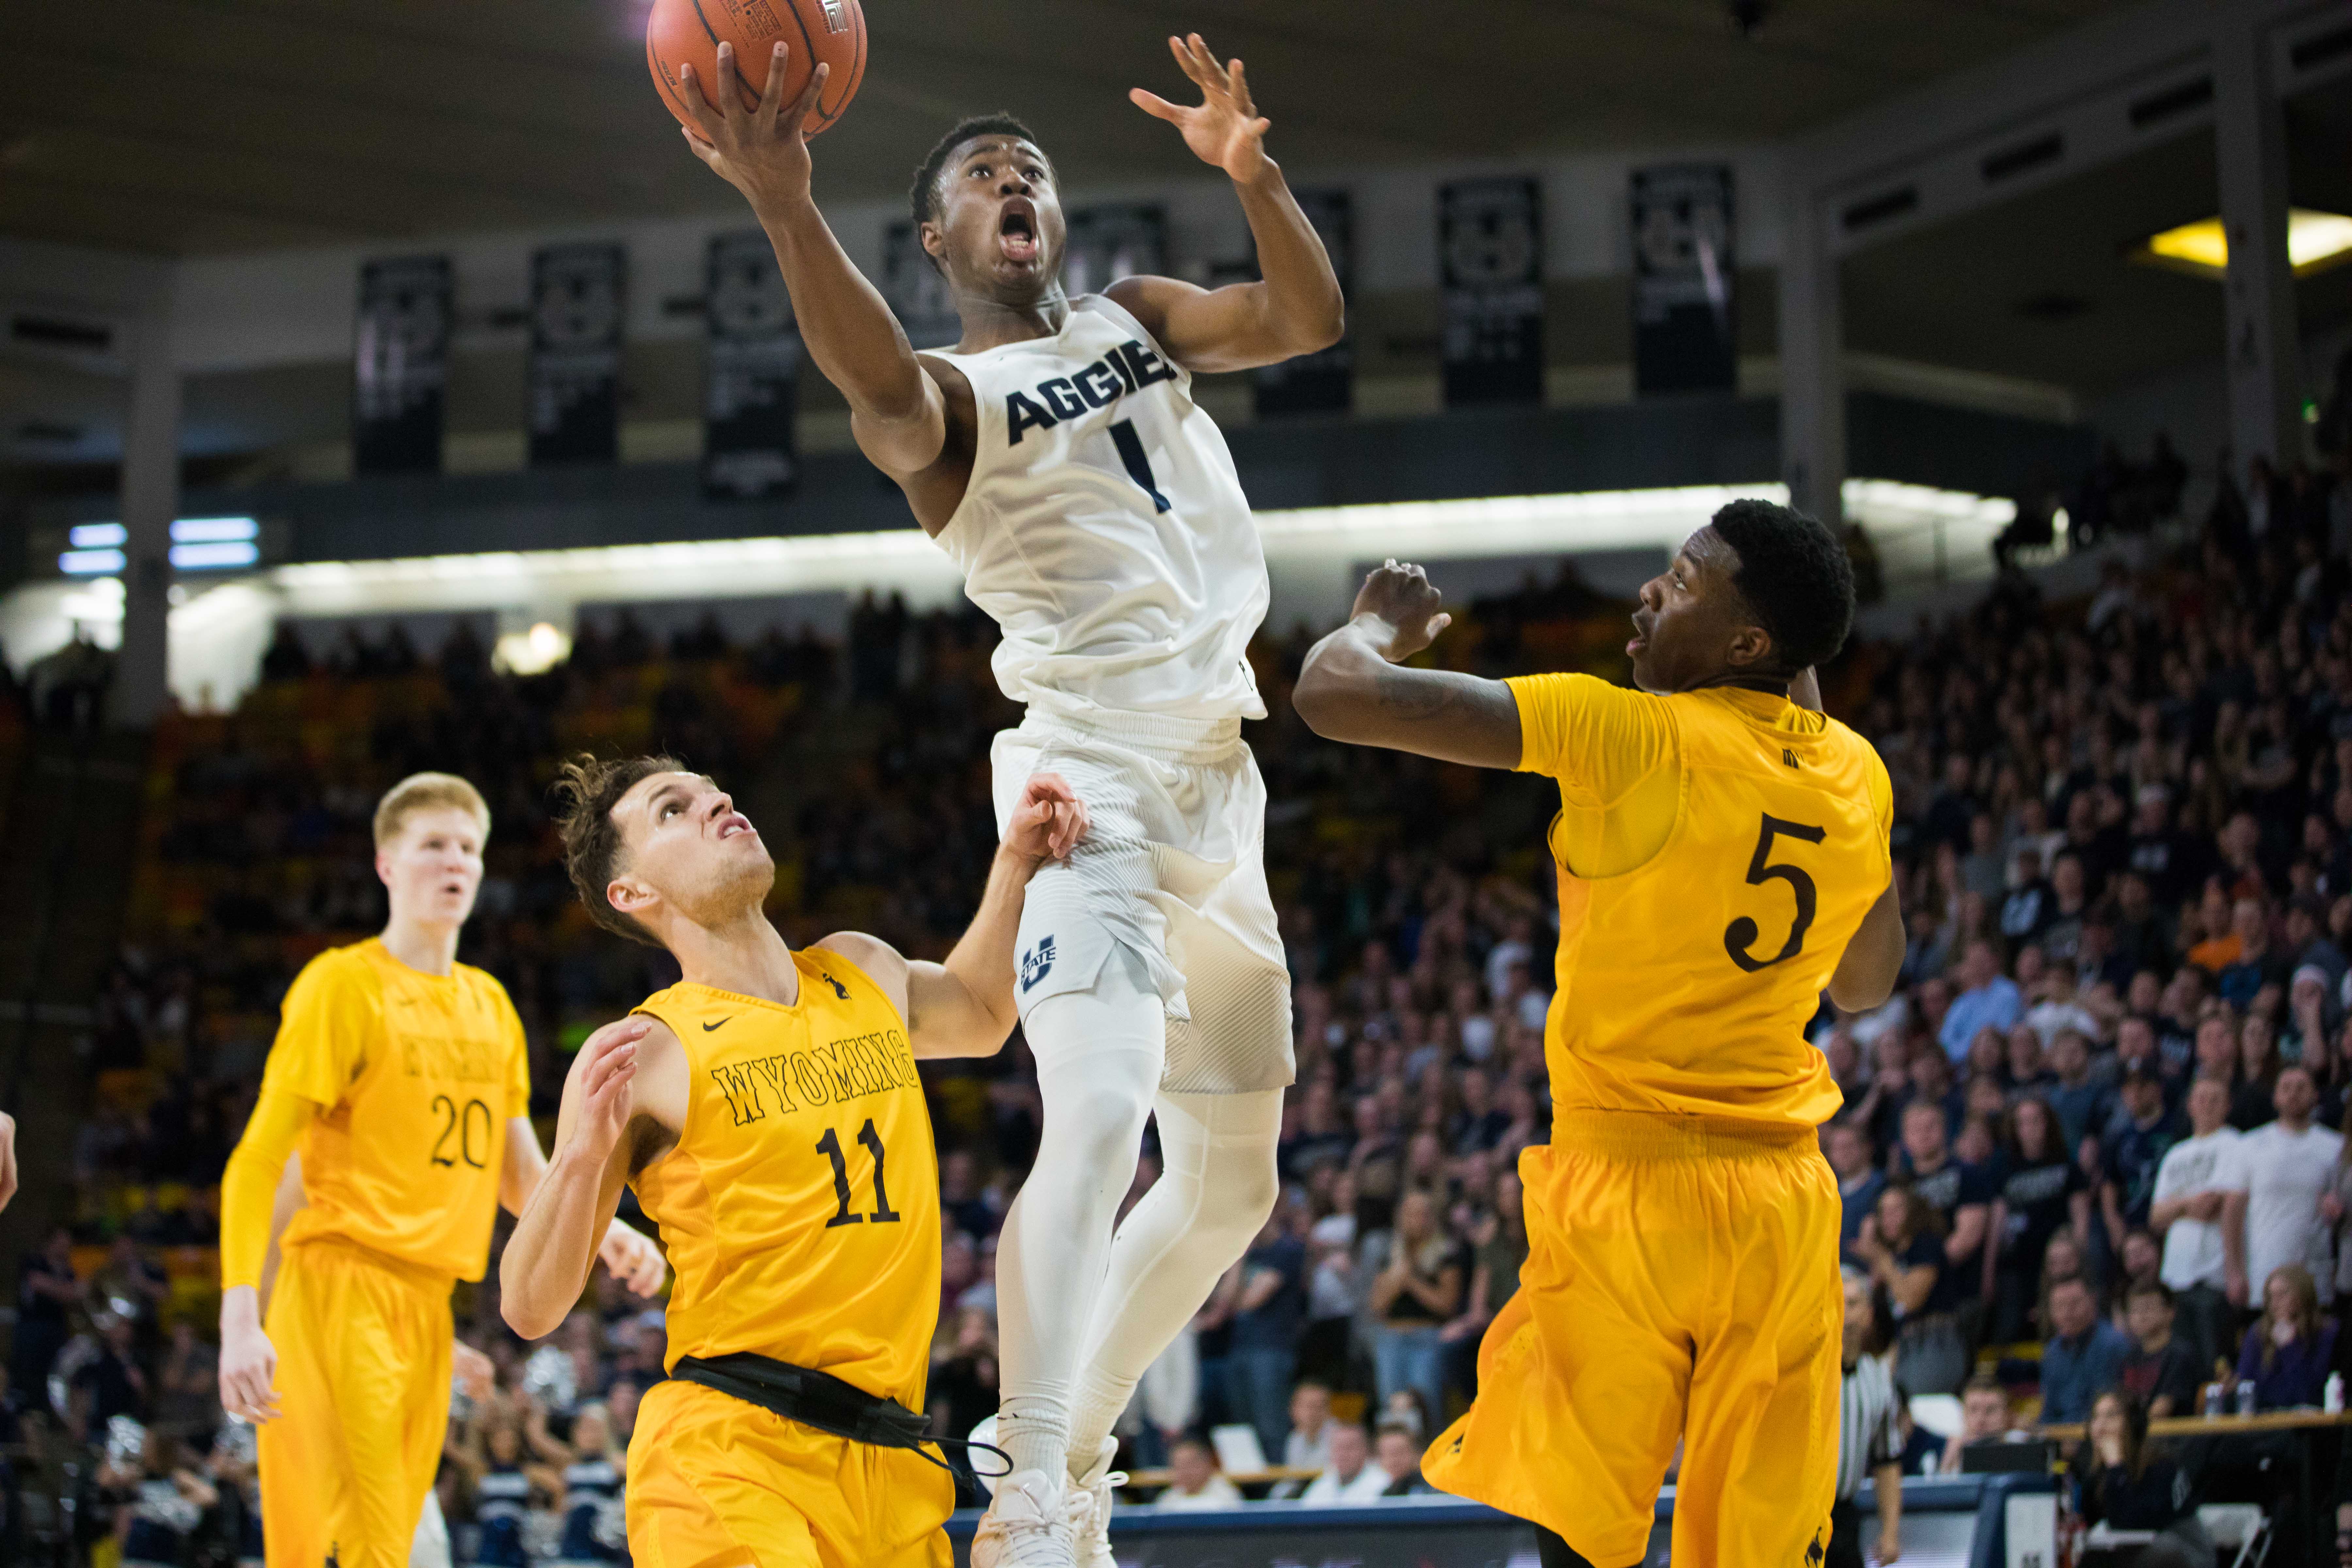 Utah State men's and women's basketball conference schedule announced